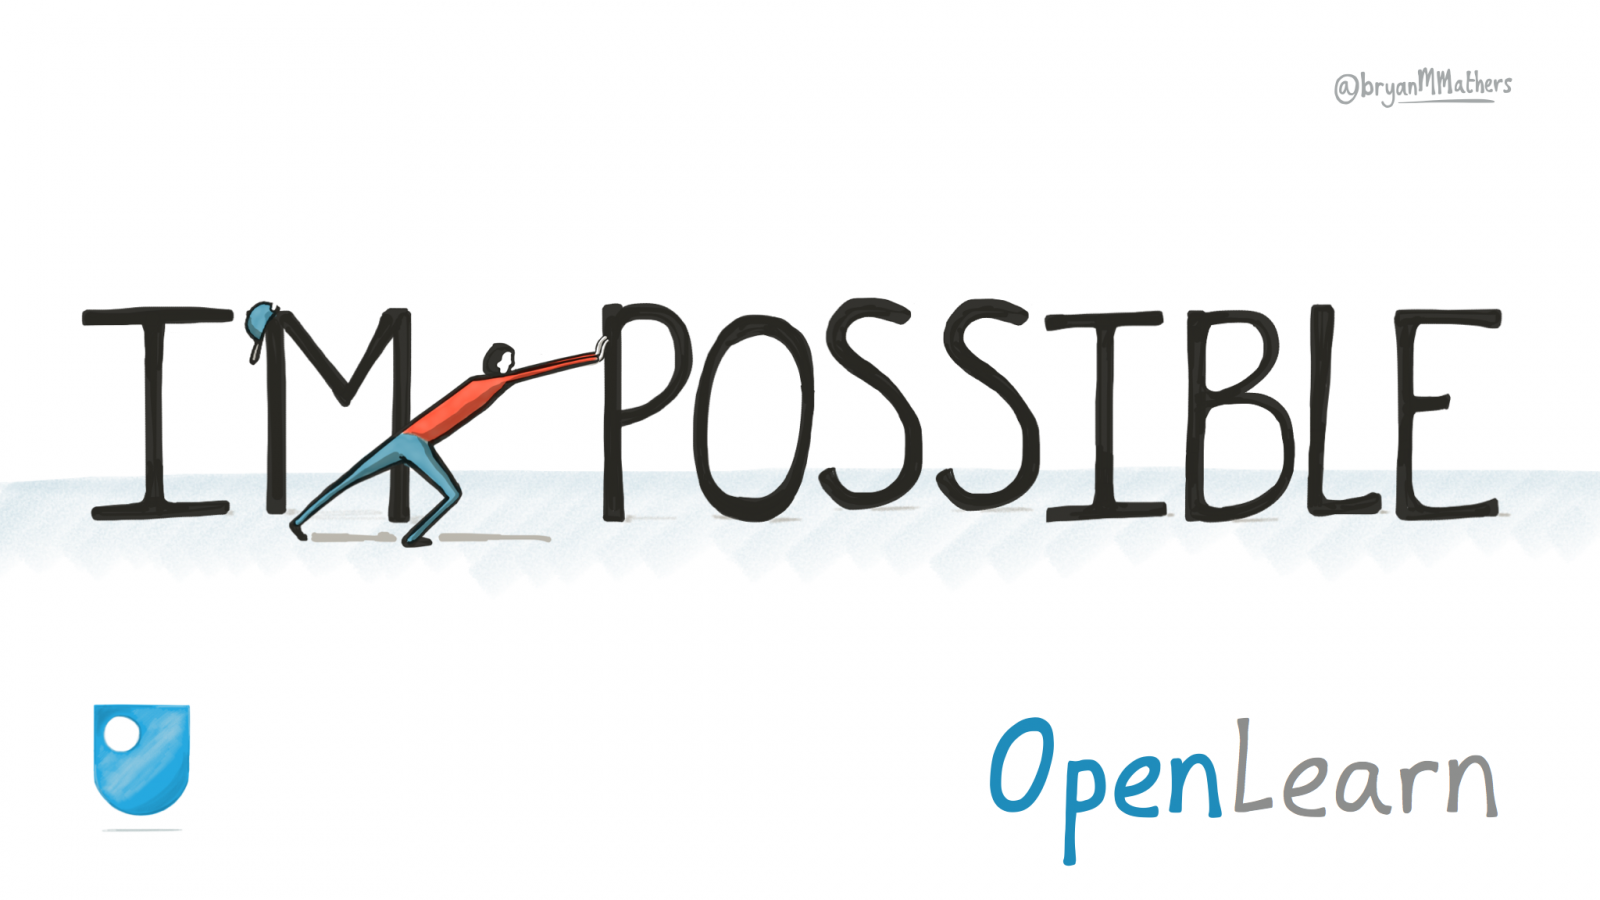 OpenLearn makes learning possible and accessible to all.